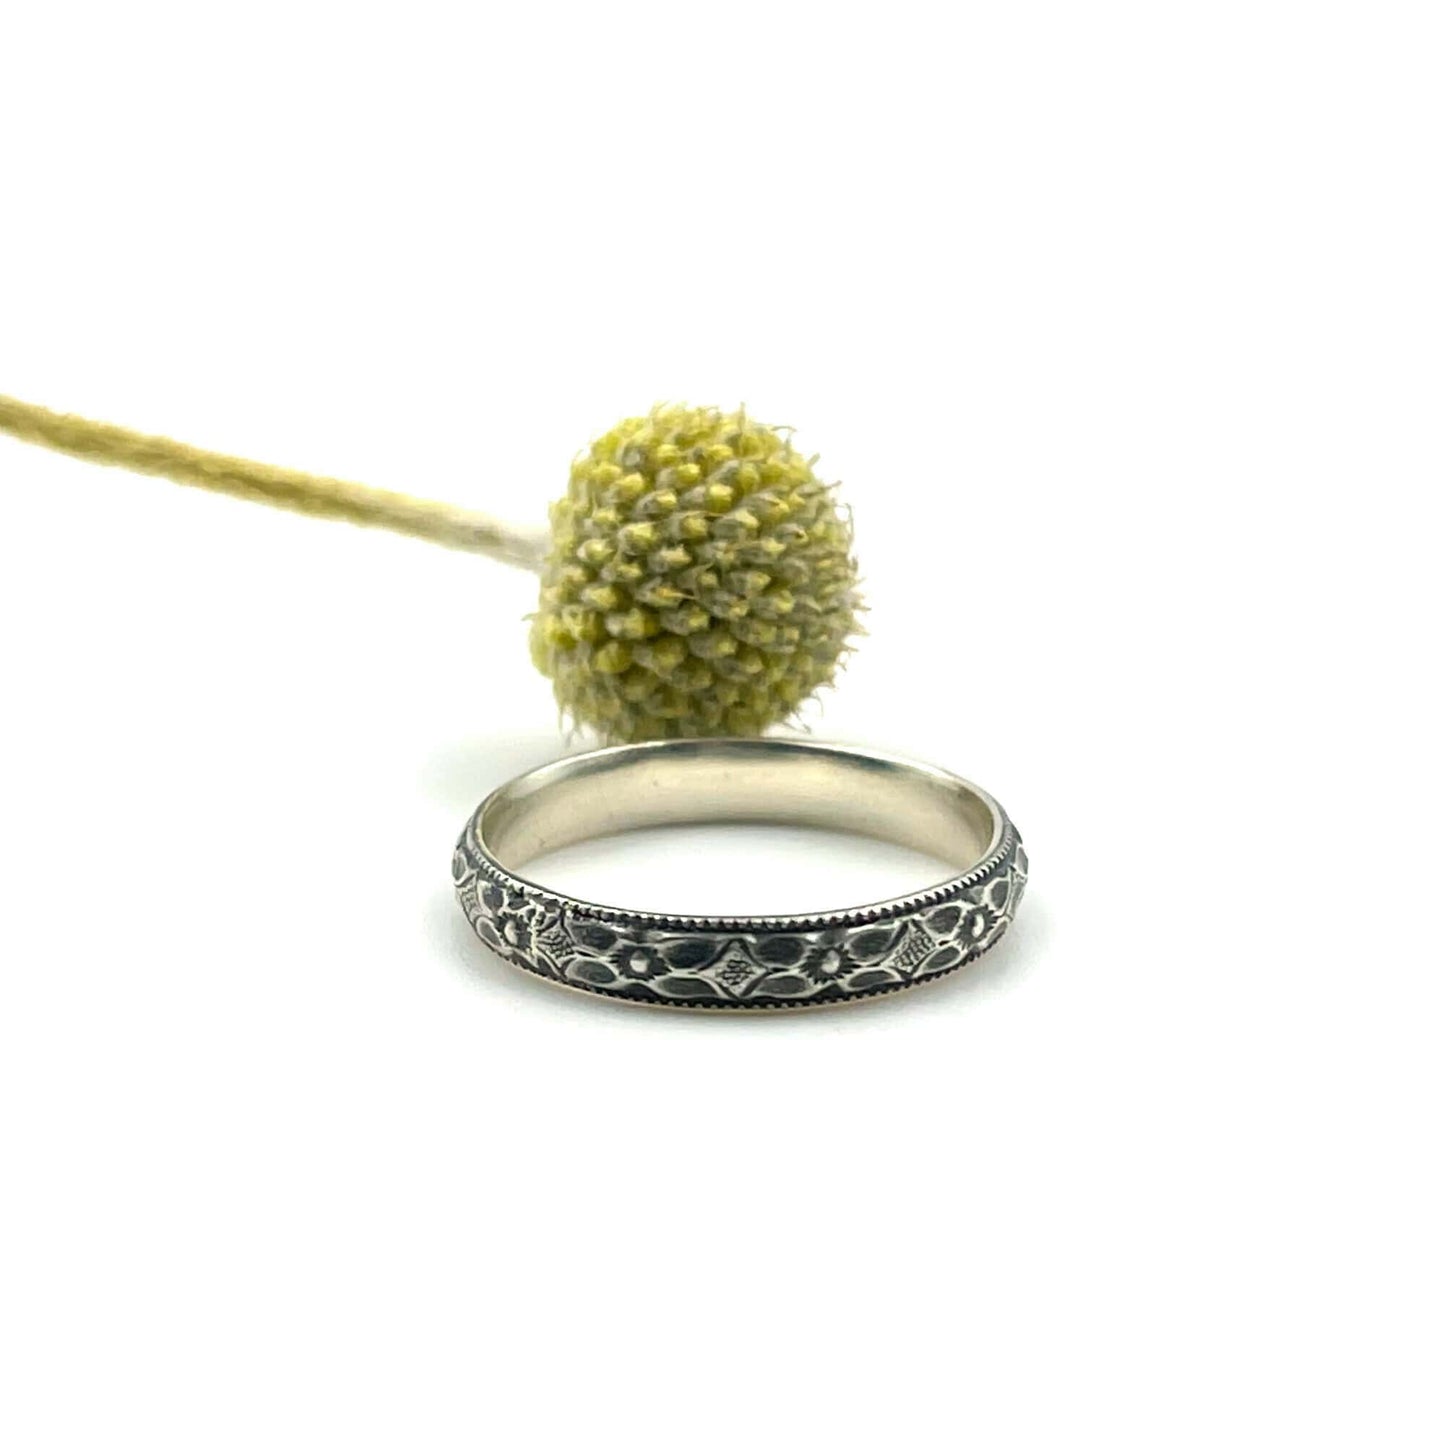 Simple silver ring with floral pattern in front of a dried billy button